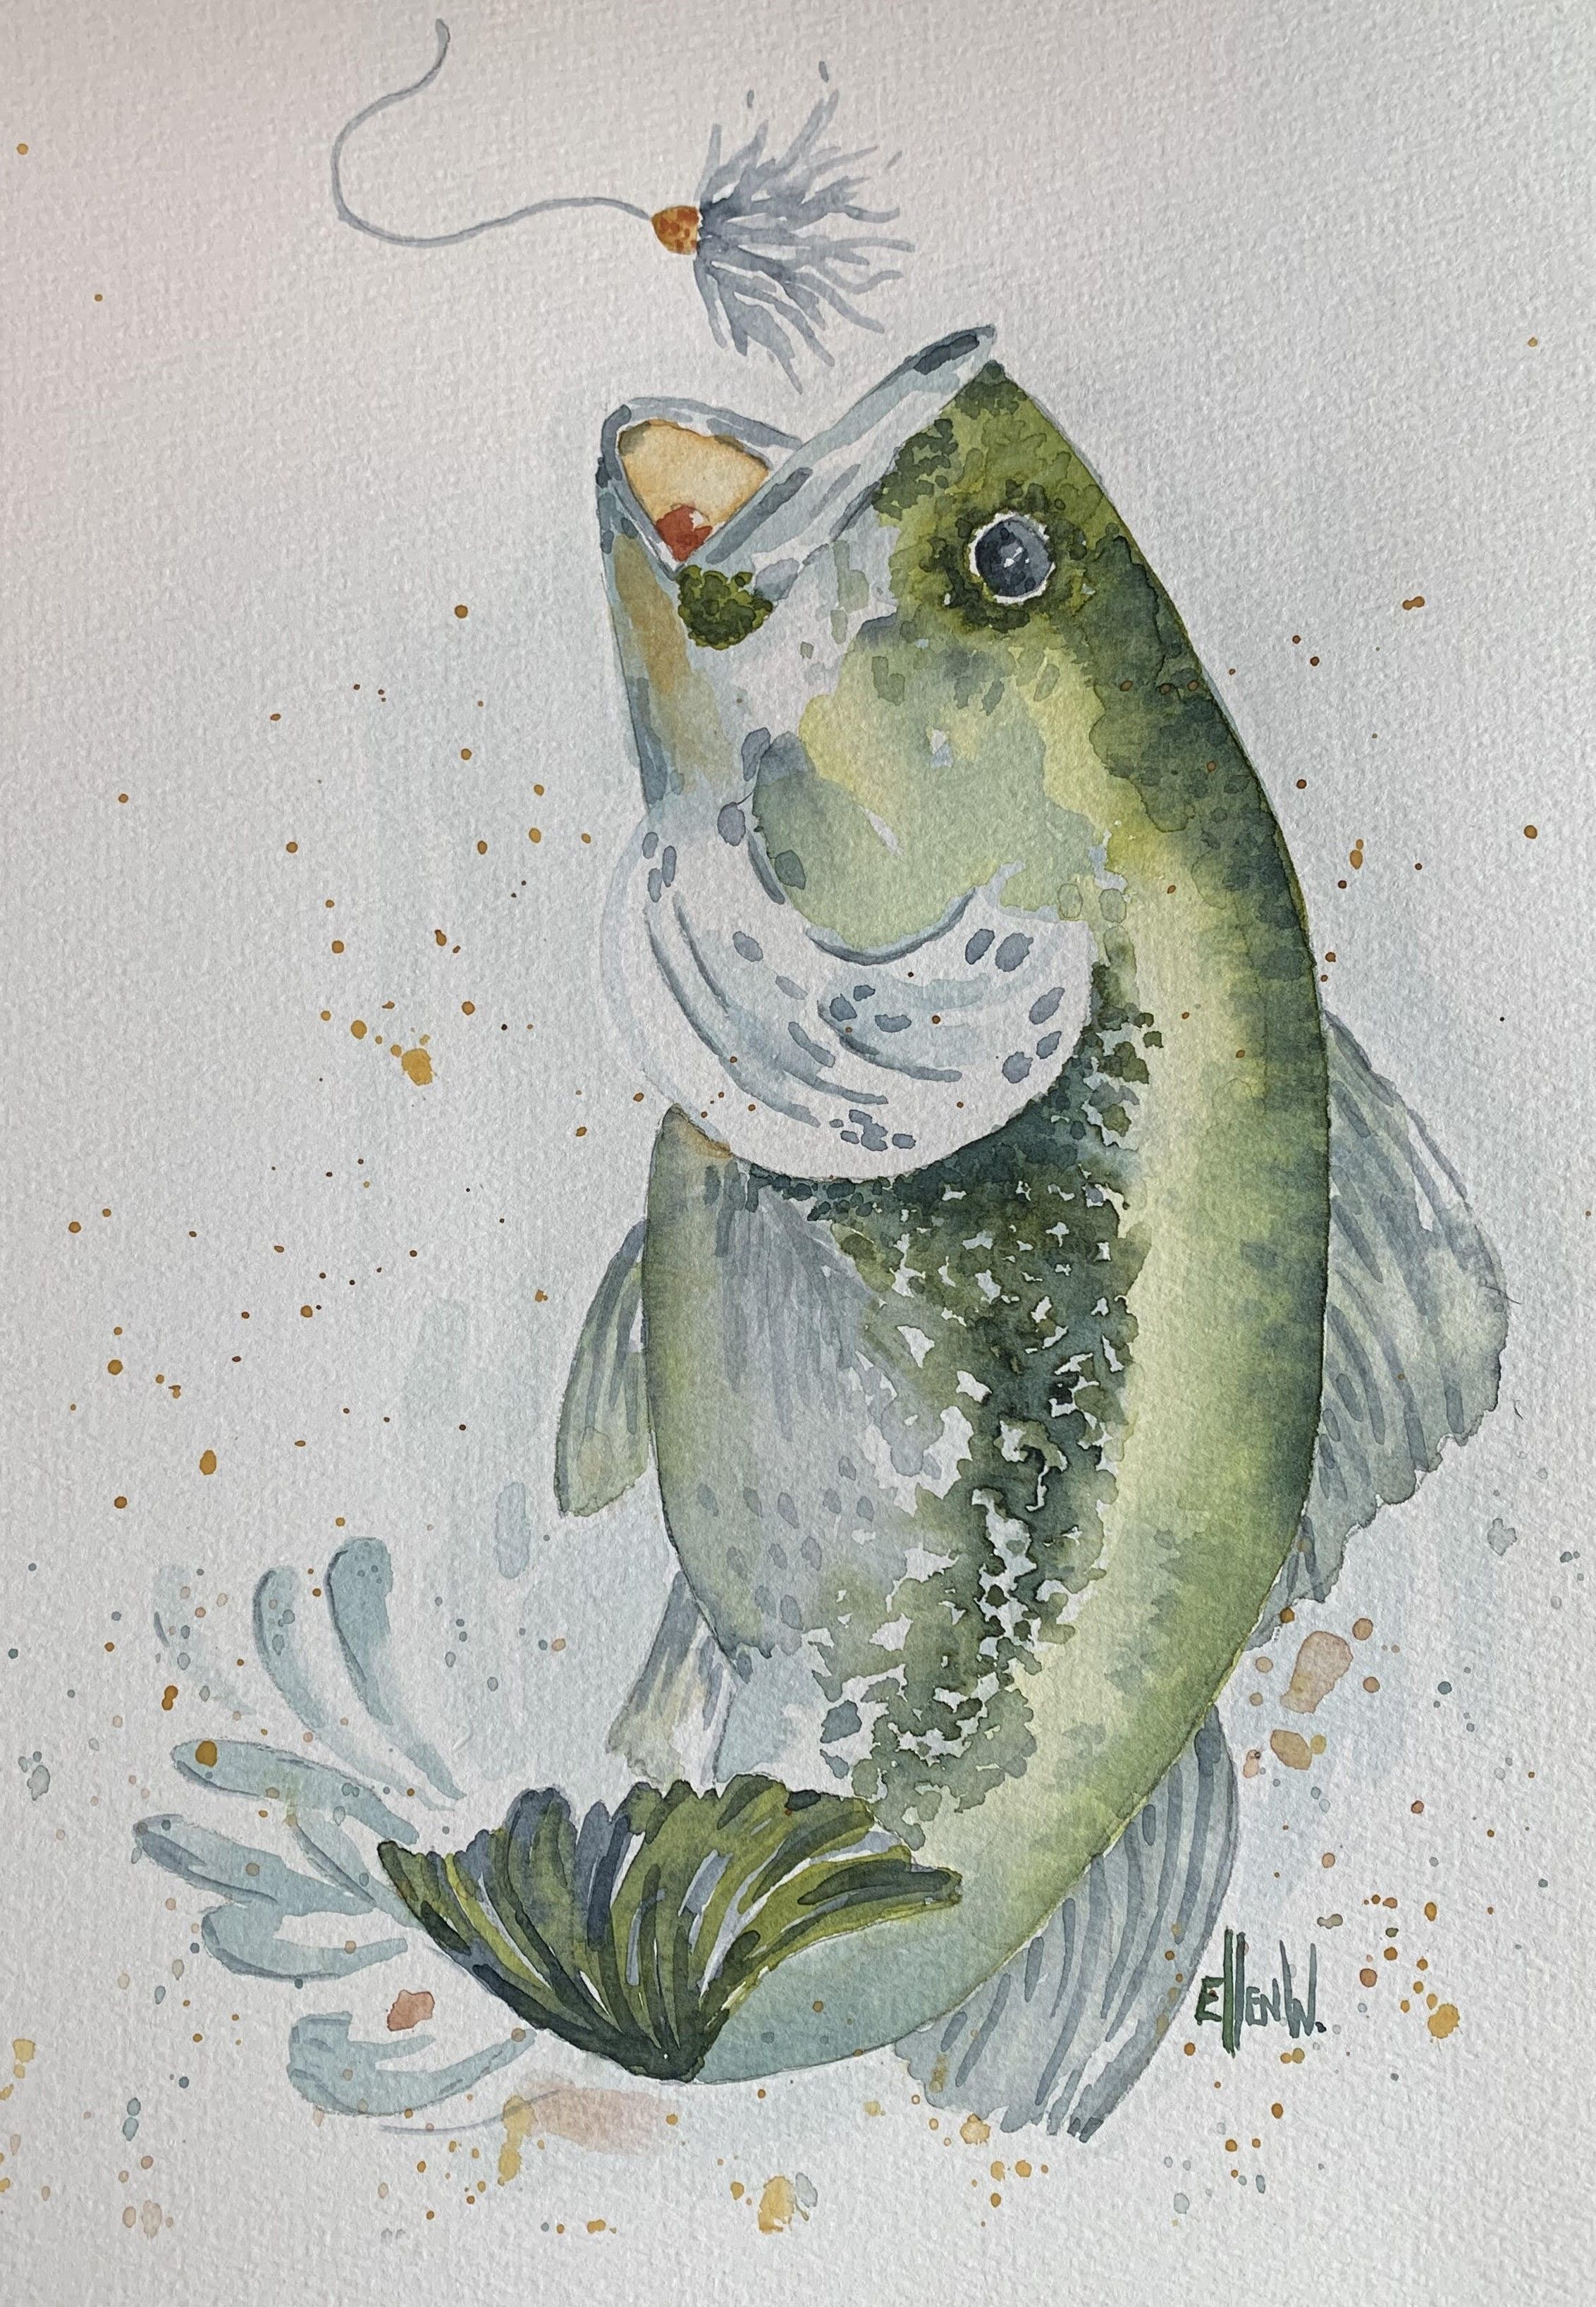 A large mouth bass is rising out of the water jumping to catch a fuzzy fishing bait. Its silvery and greenish body is in a c-shaped curve with its tail splashing the water.